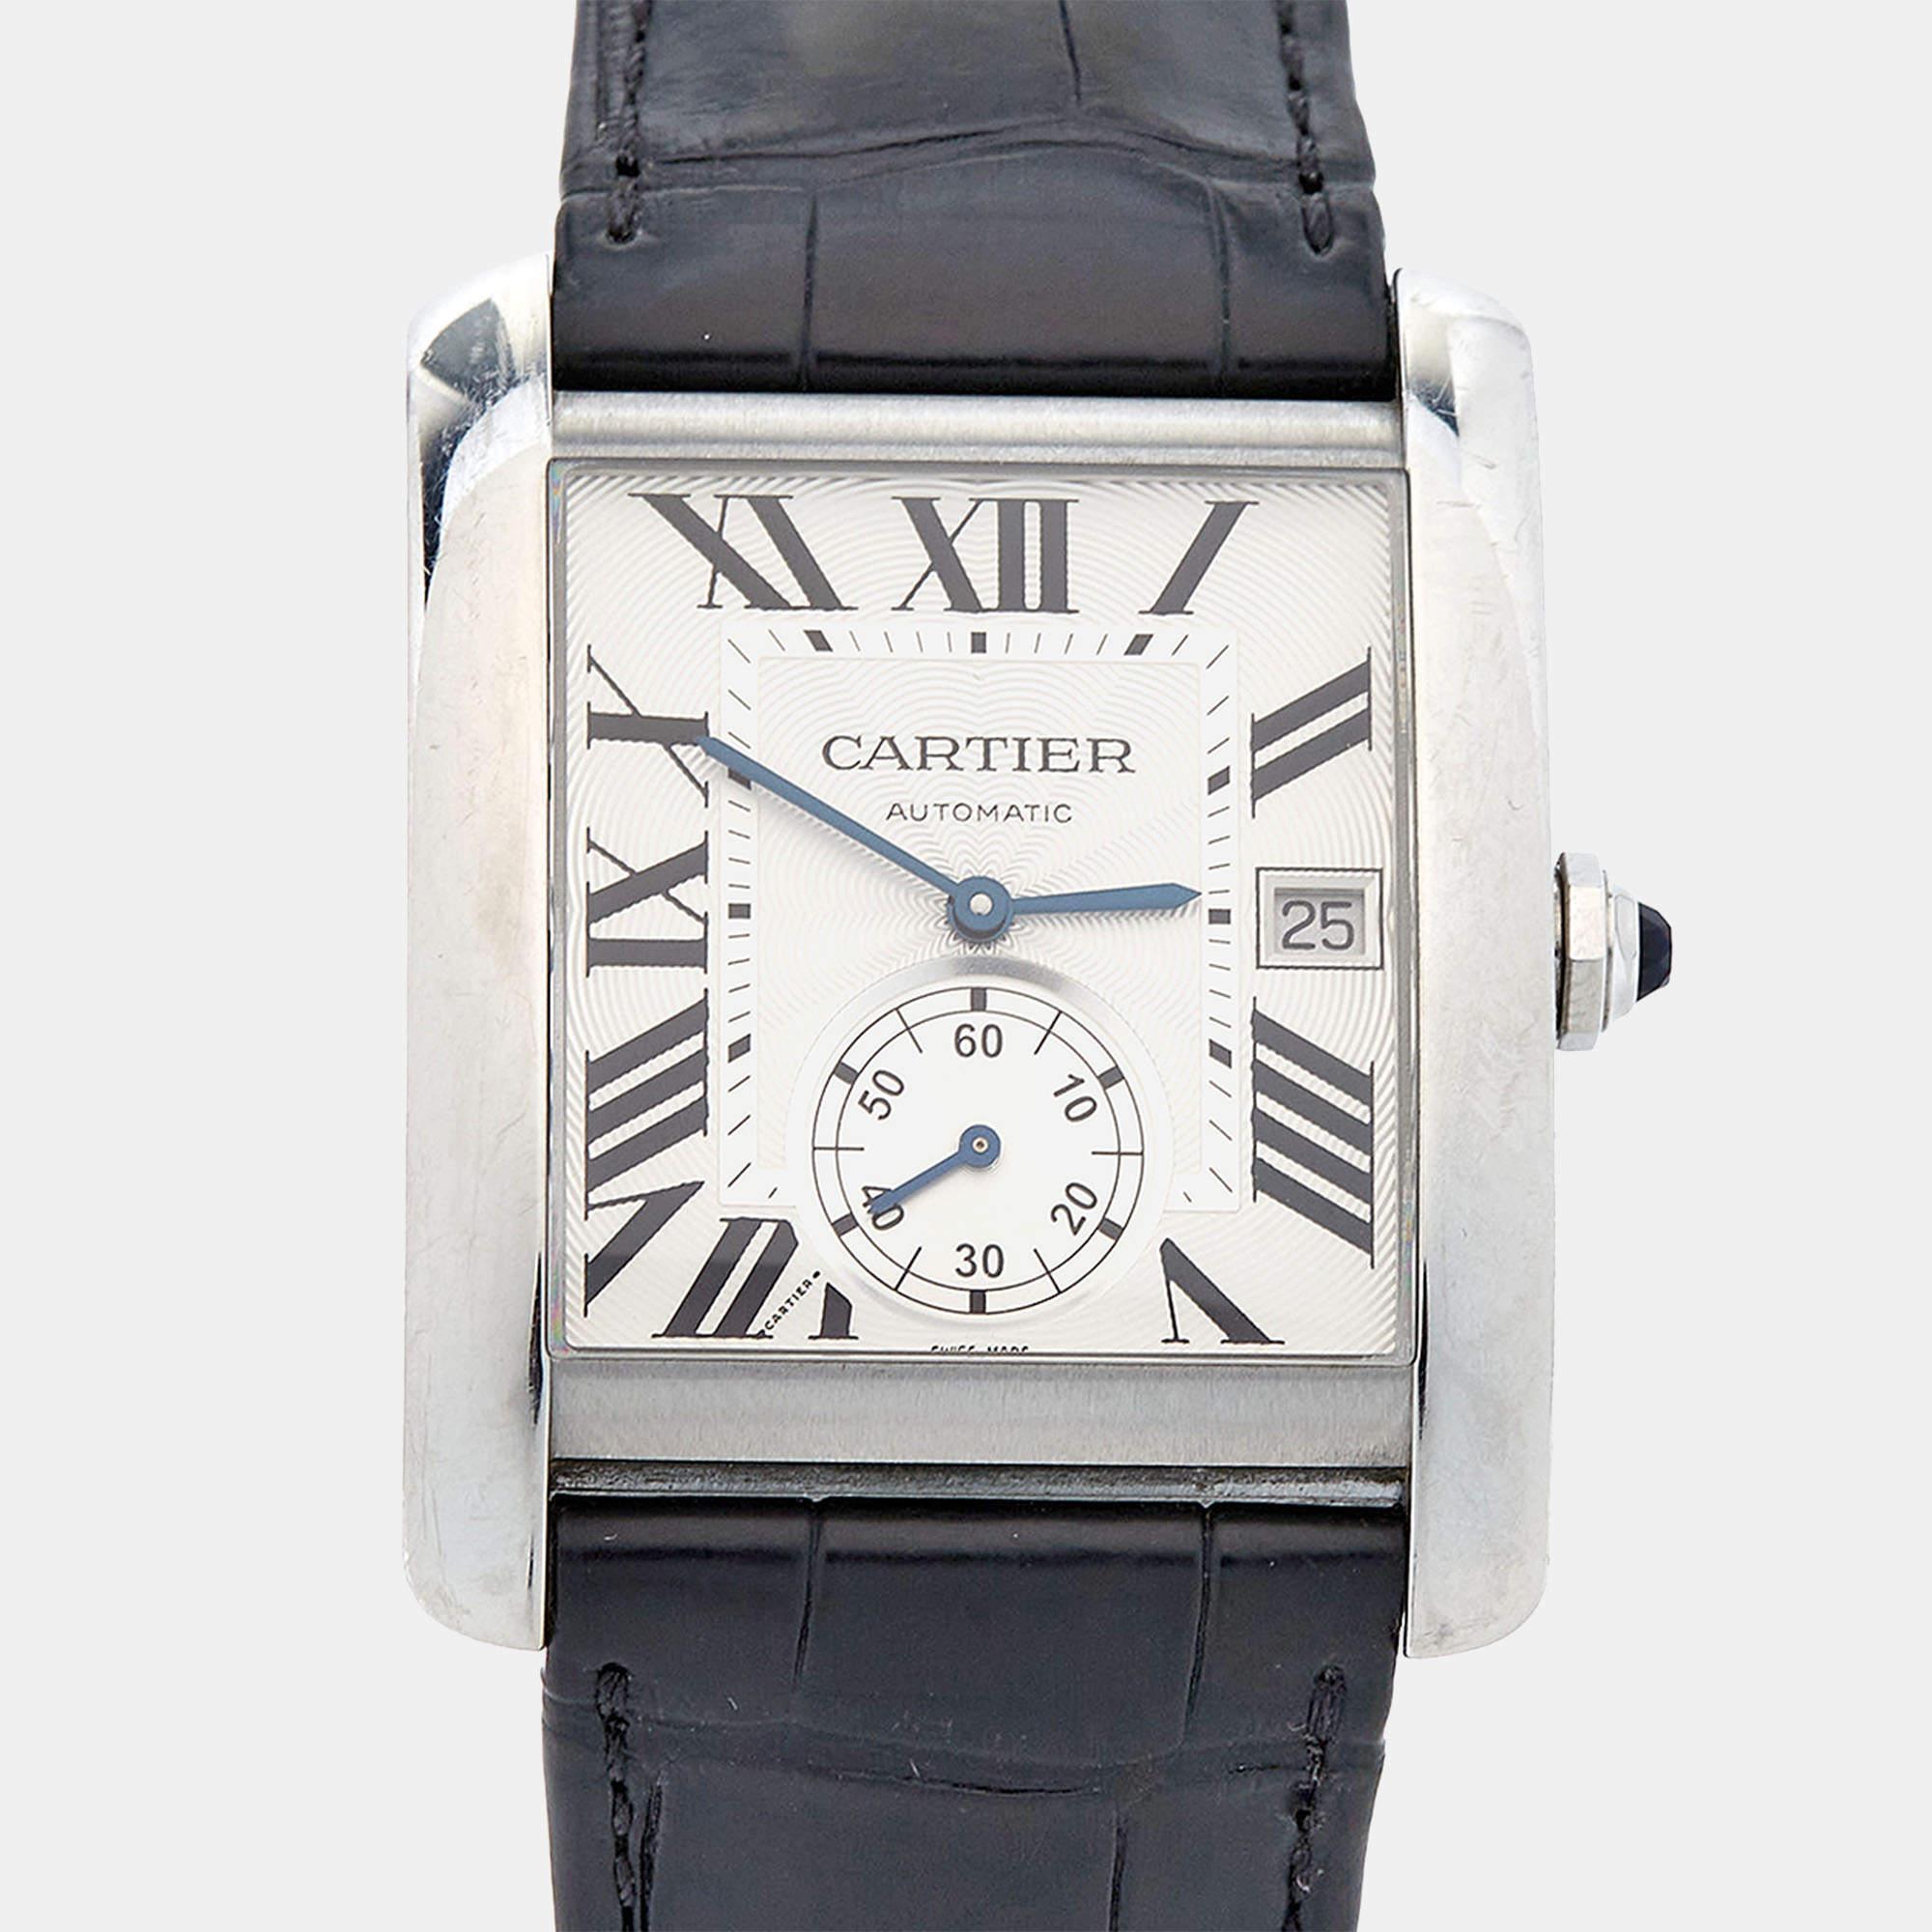 Here's your chance to add Cartier's magnificent Tank MC W5330003 watch to your prized collection of watches. It has a square case in stainless steel, a synthetic cabochon-shaped spinel on the crown, and a black alligator leather bracelet with buckle